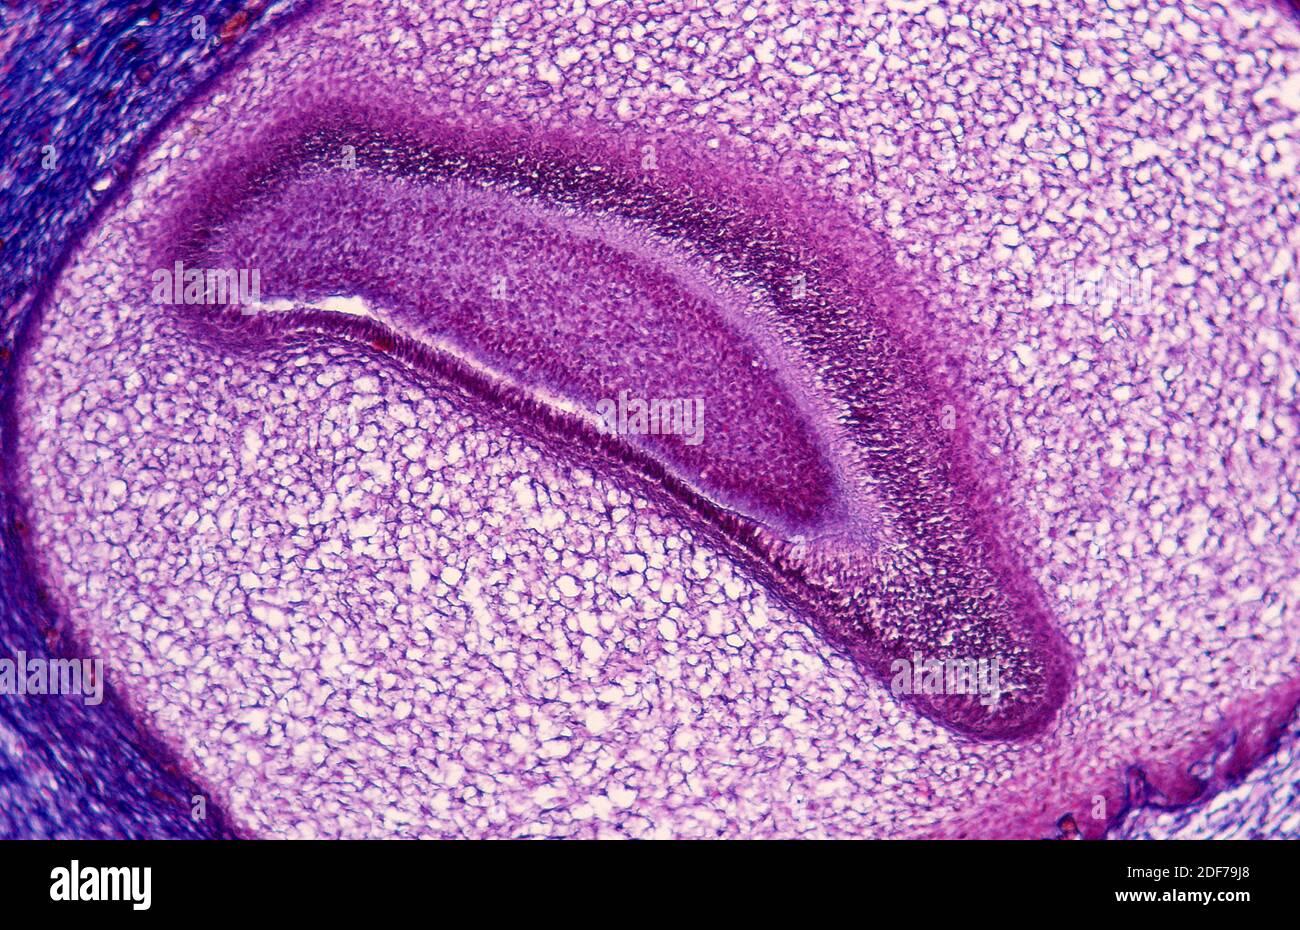 Bone tissue on human embryonic tooth. Photomicrograph. Stock Photo